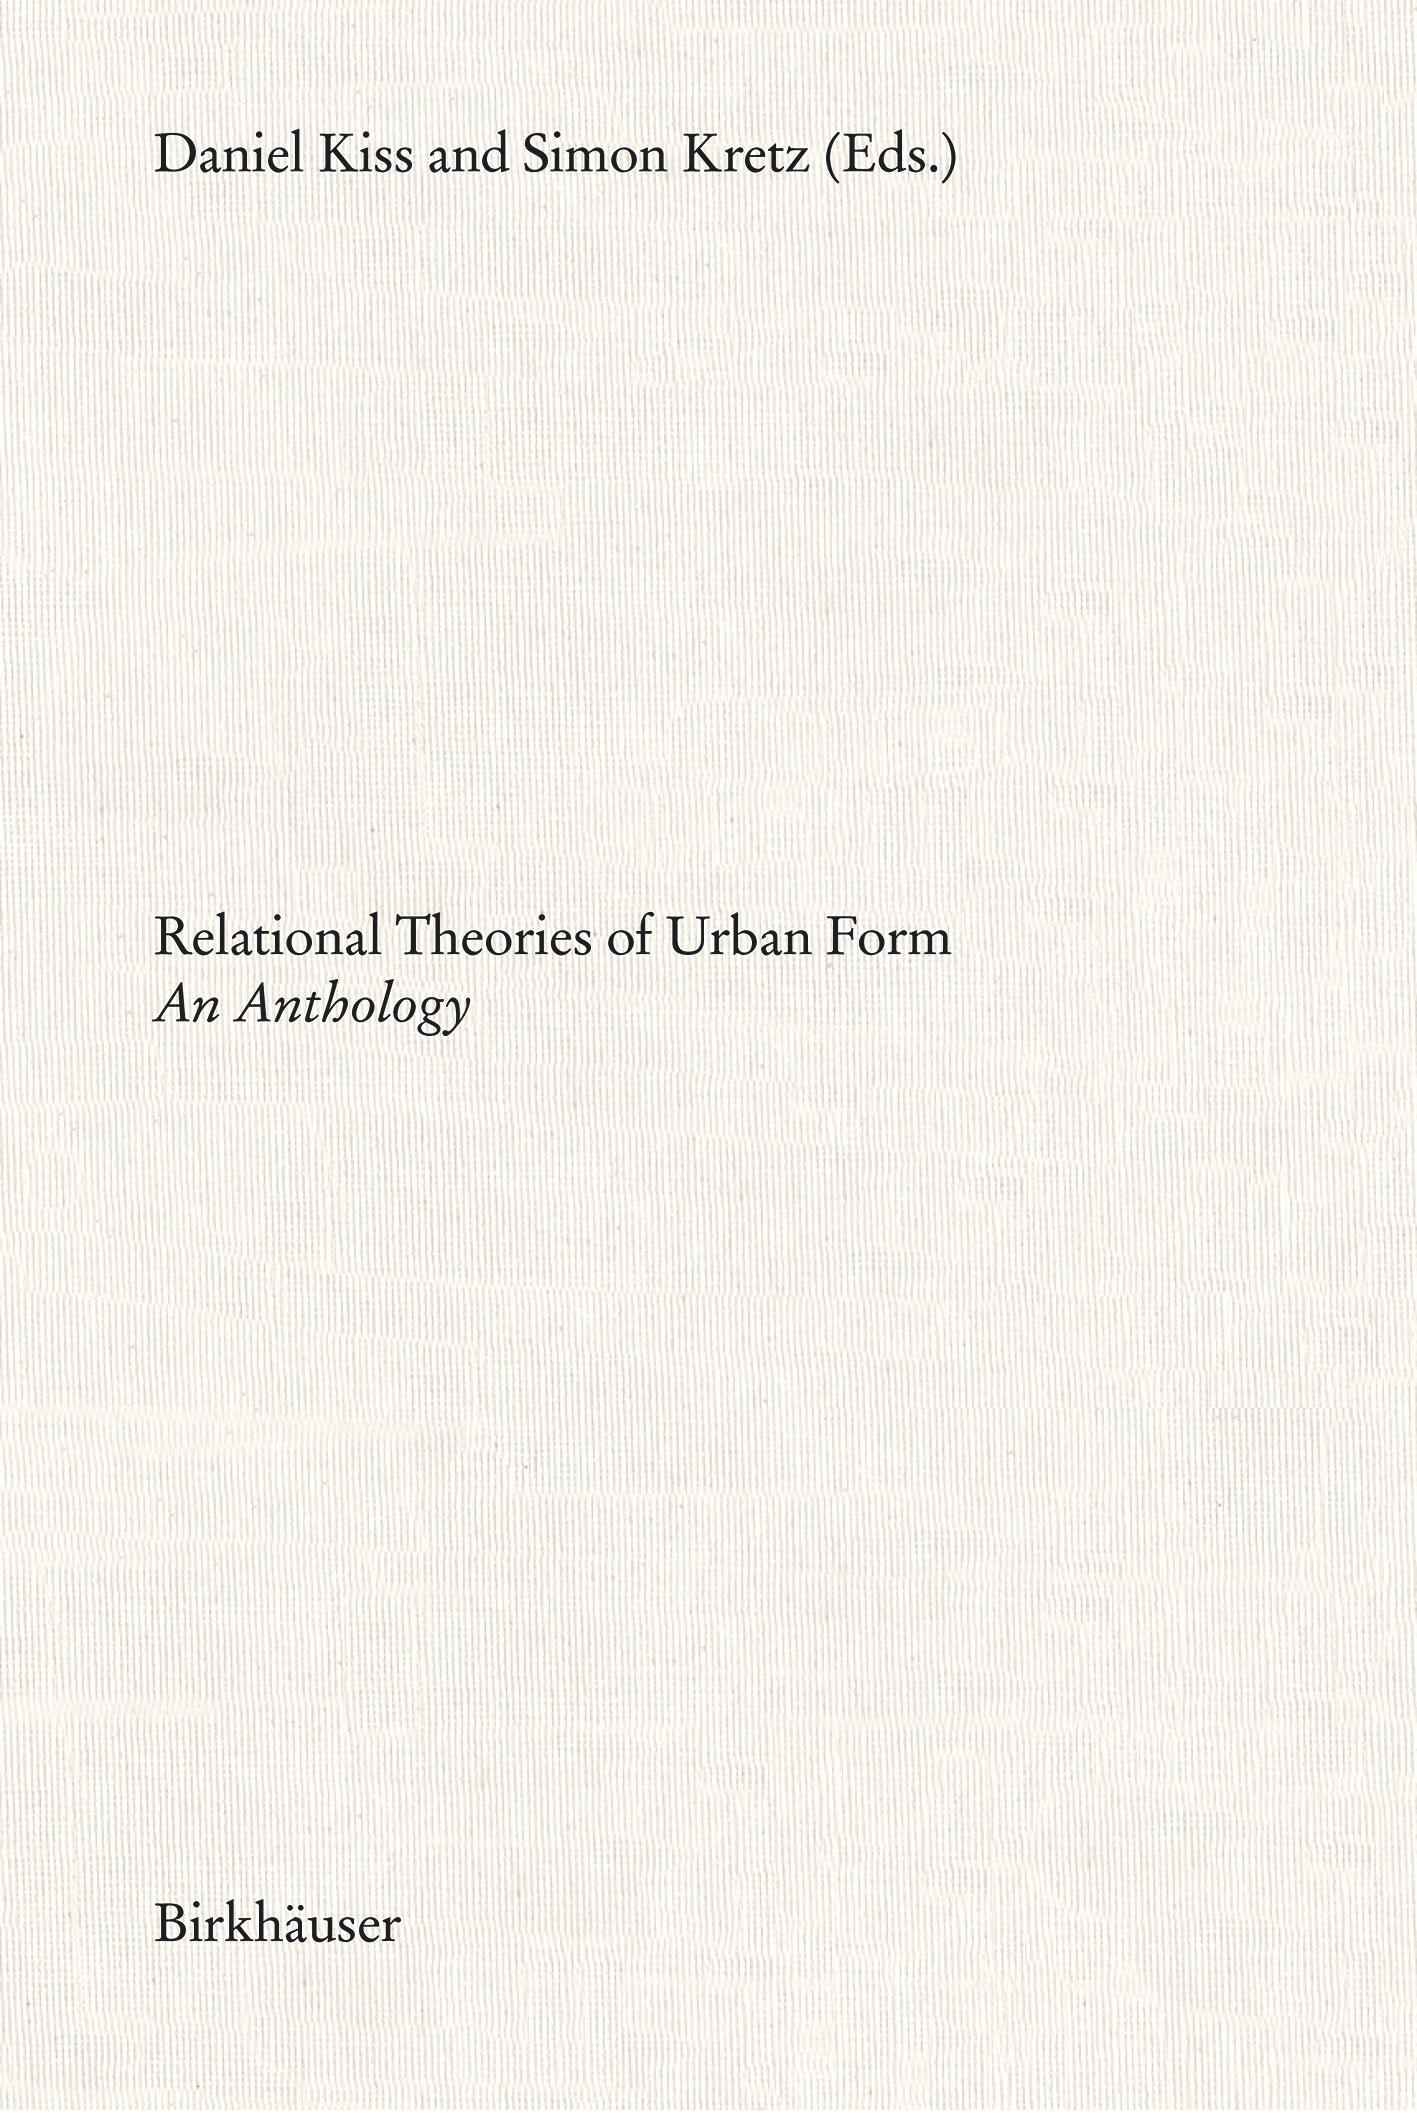 Relational Theories of Urban Form's cover